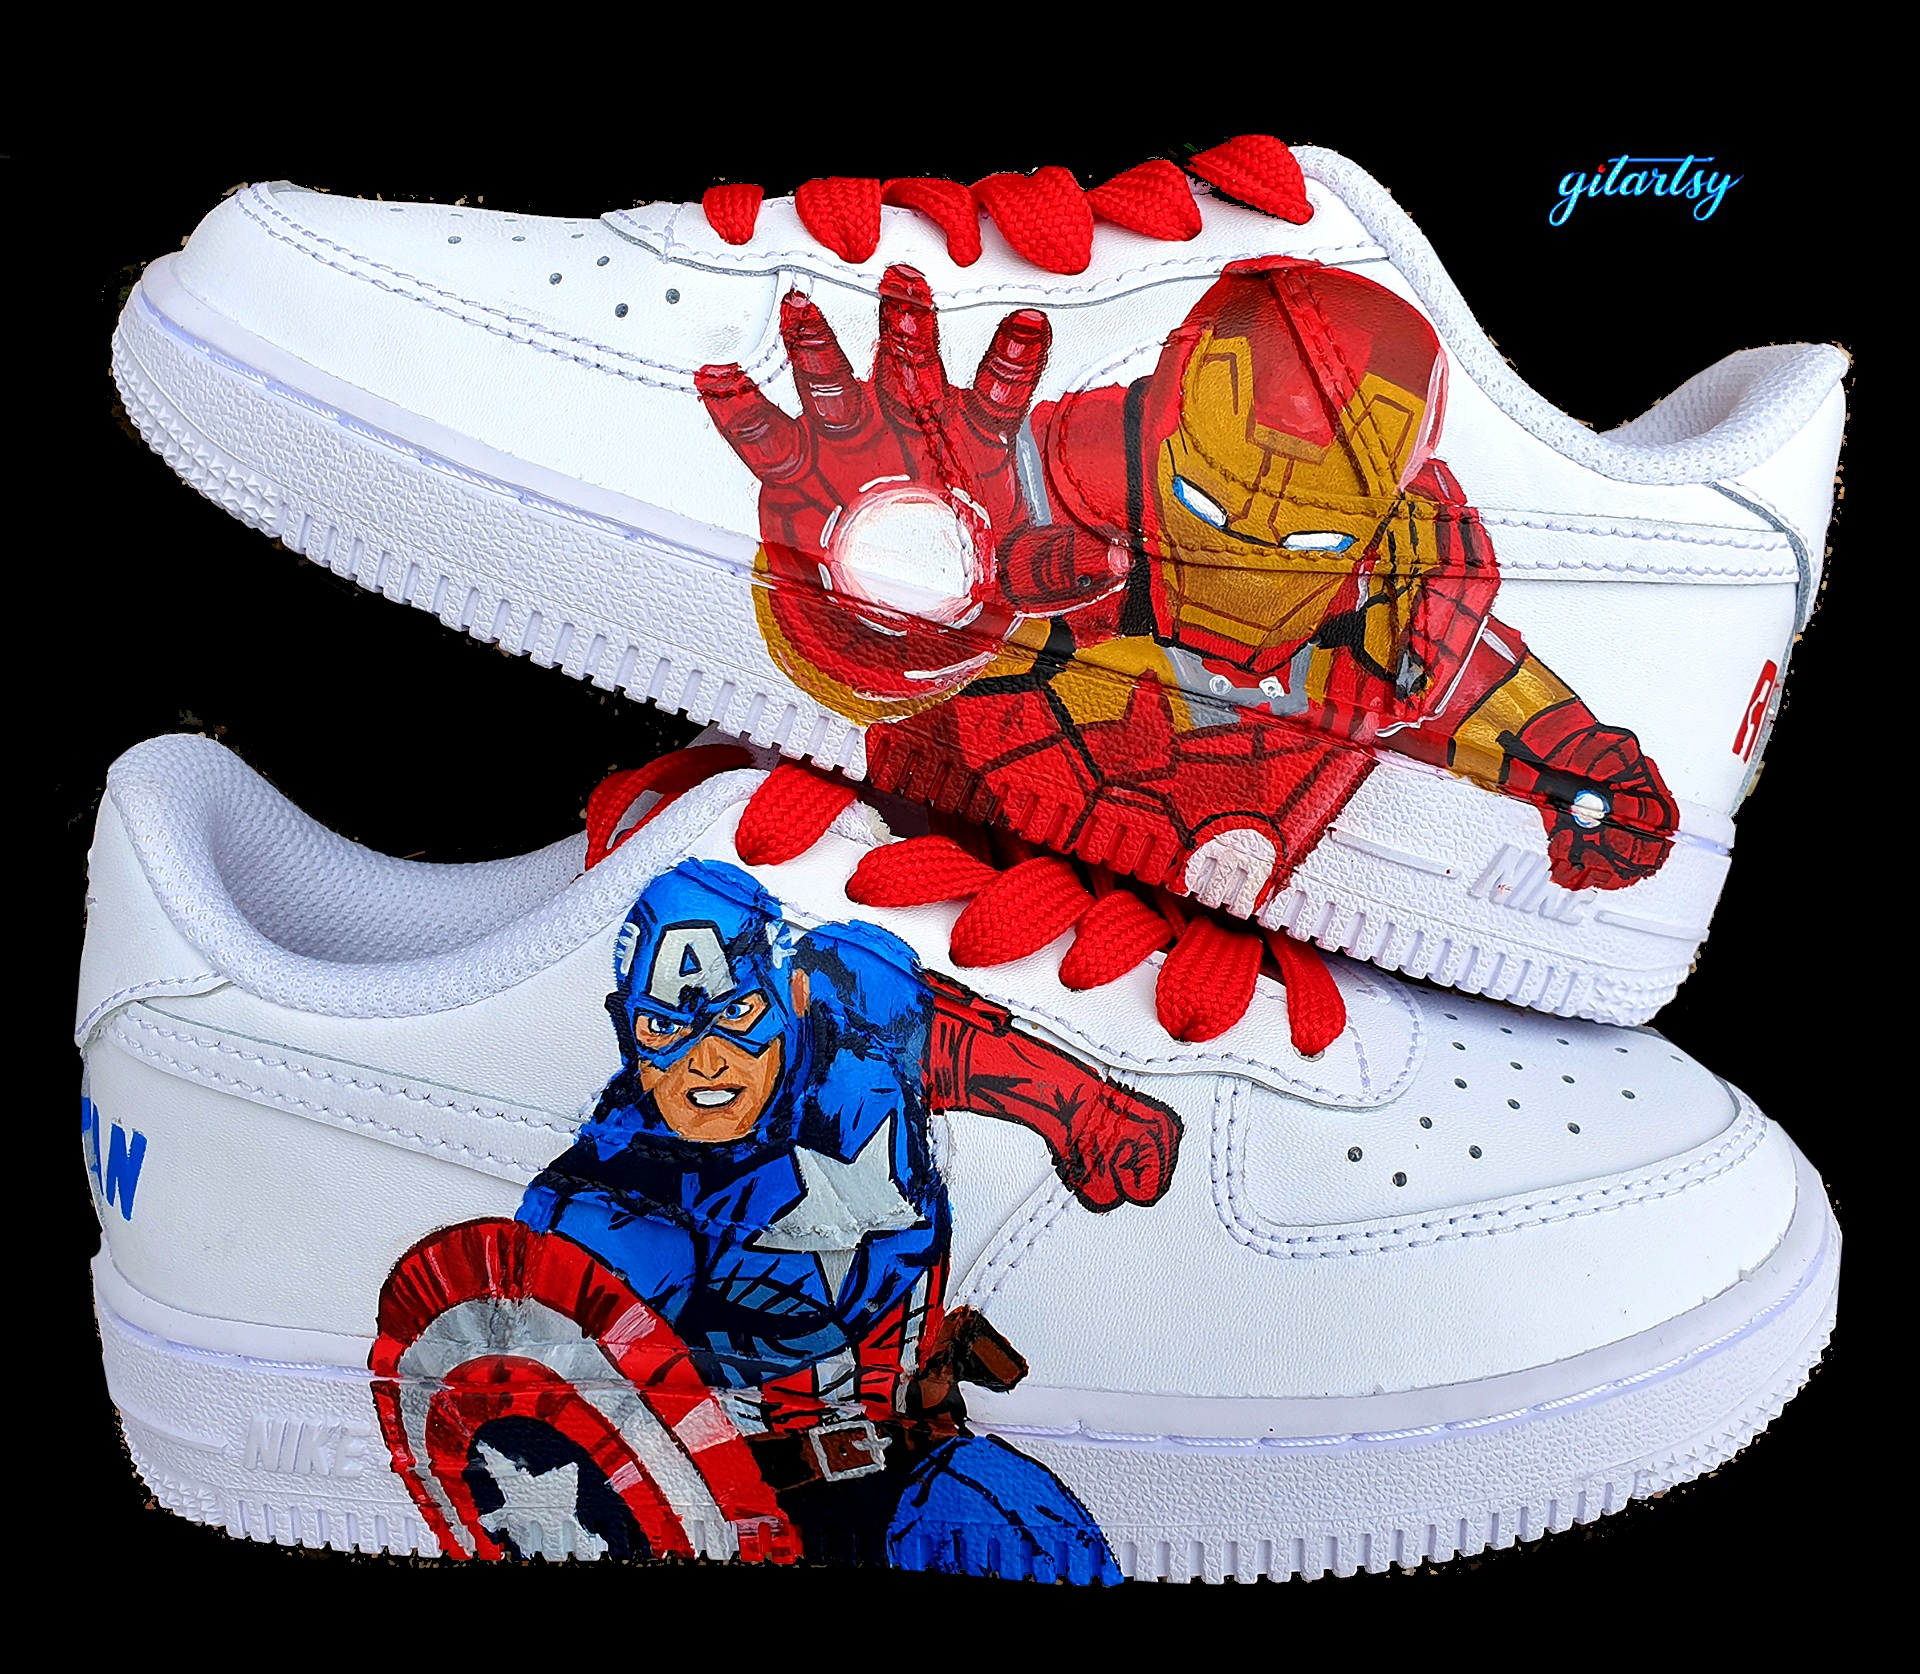 Kids Nike AF1 sneakers painted - marvel characters: Iron Man, Captain America 